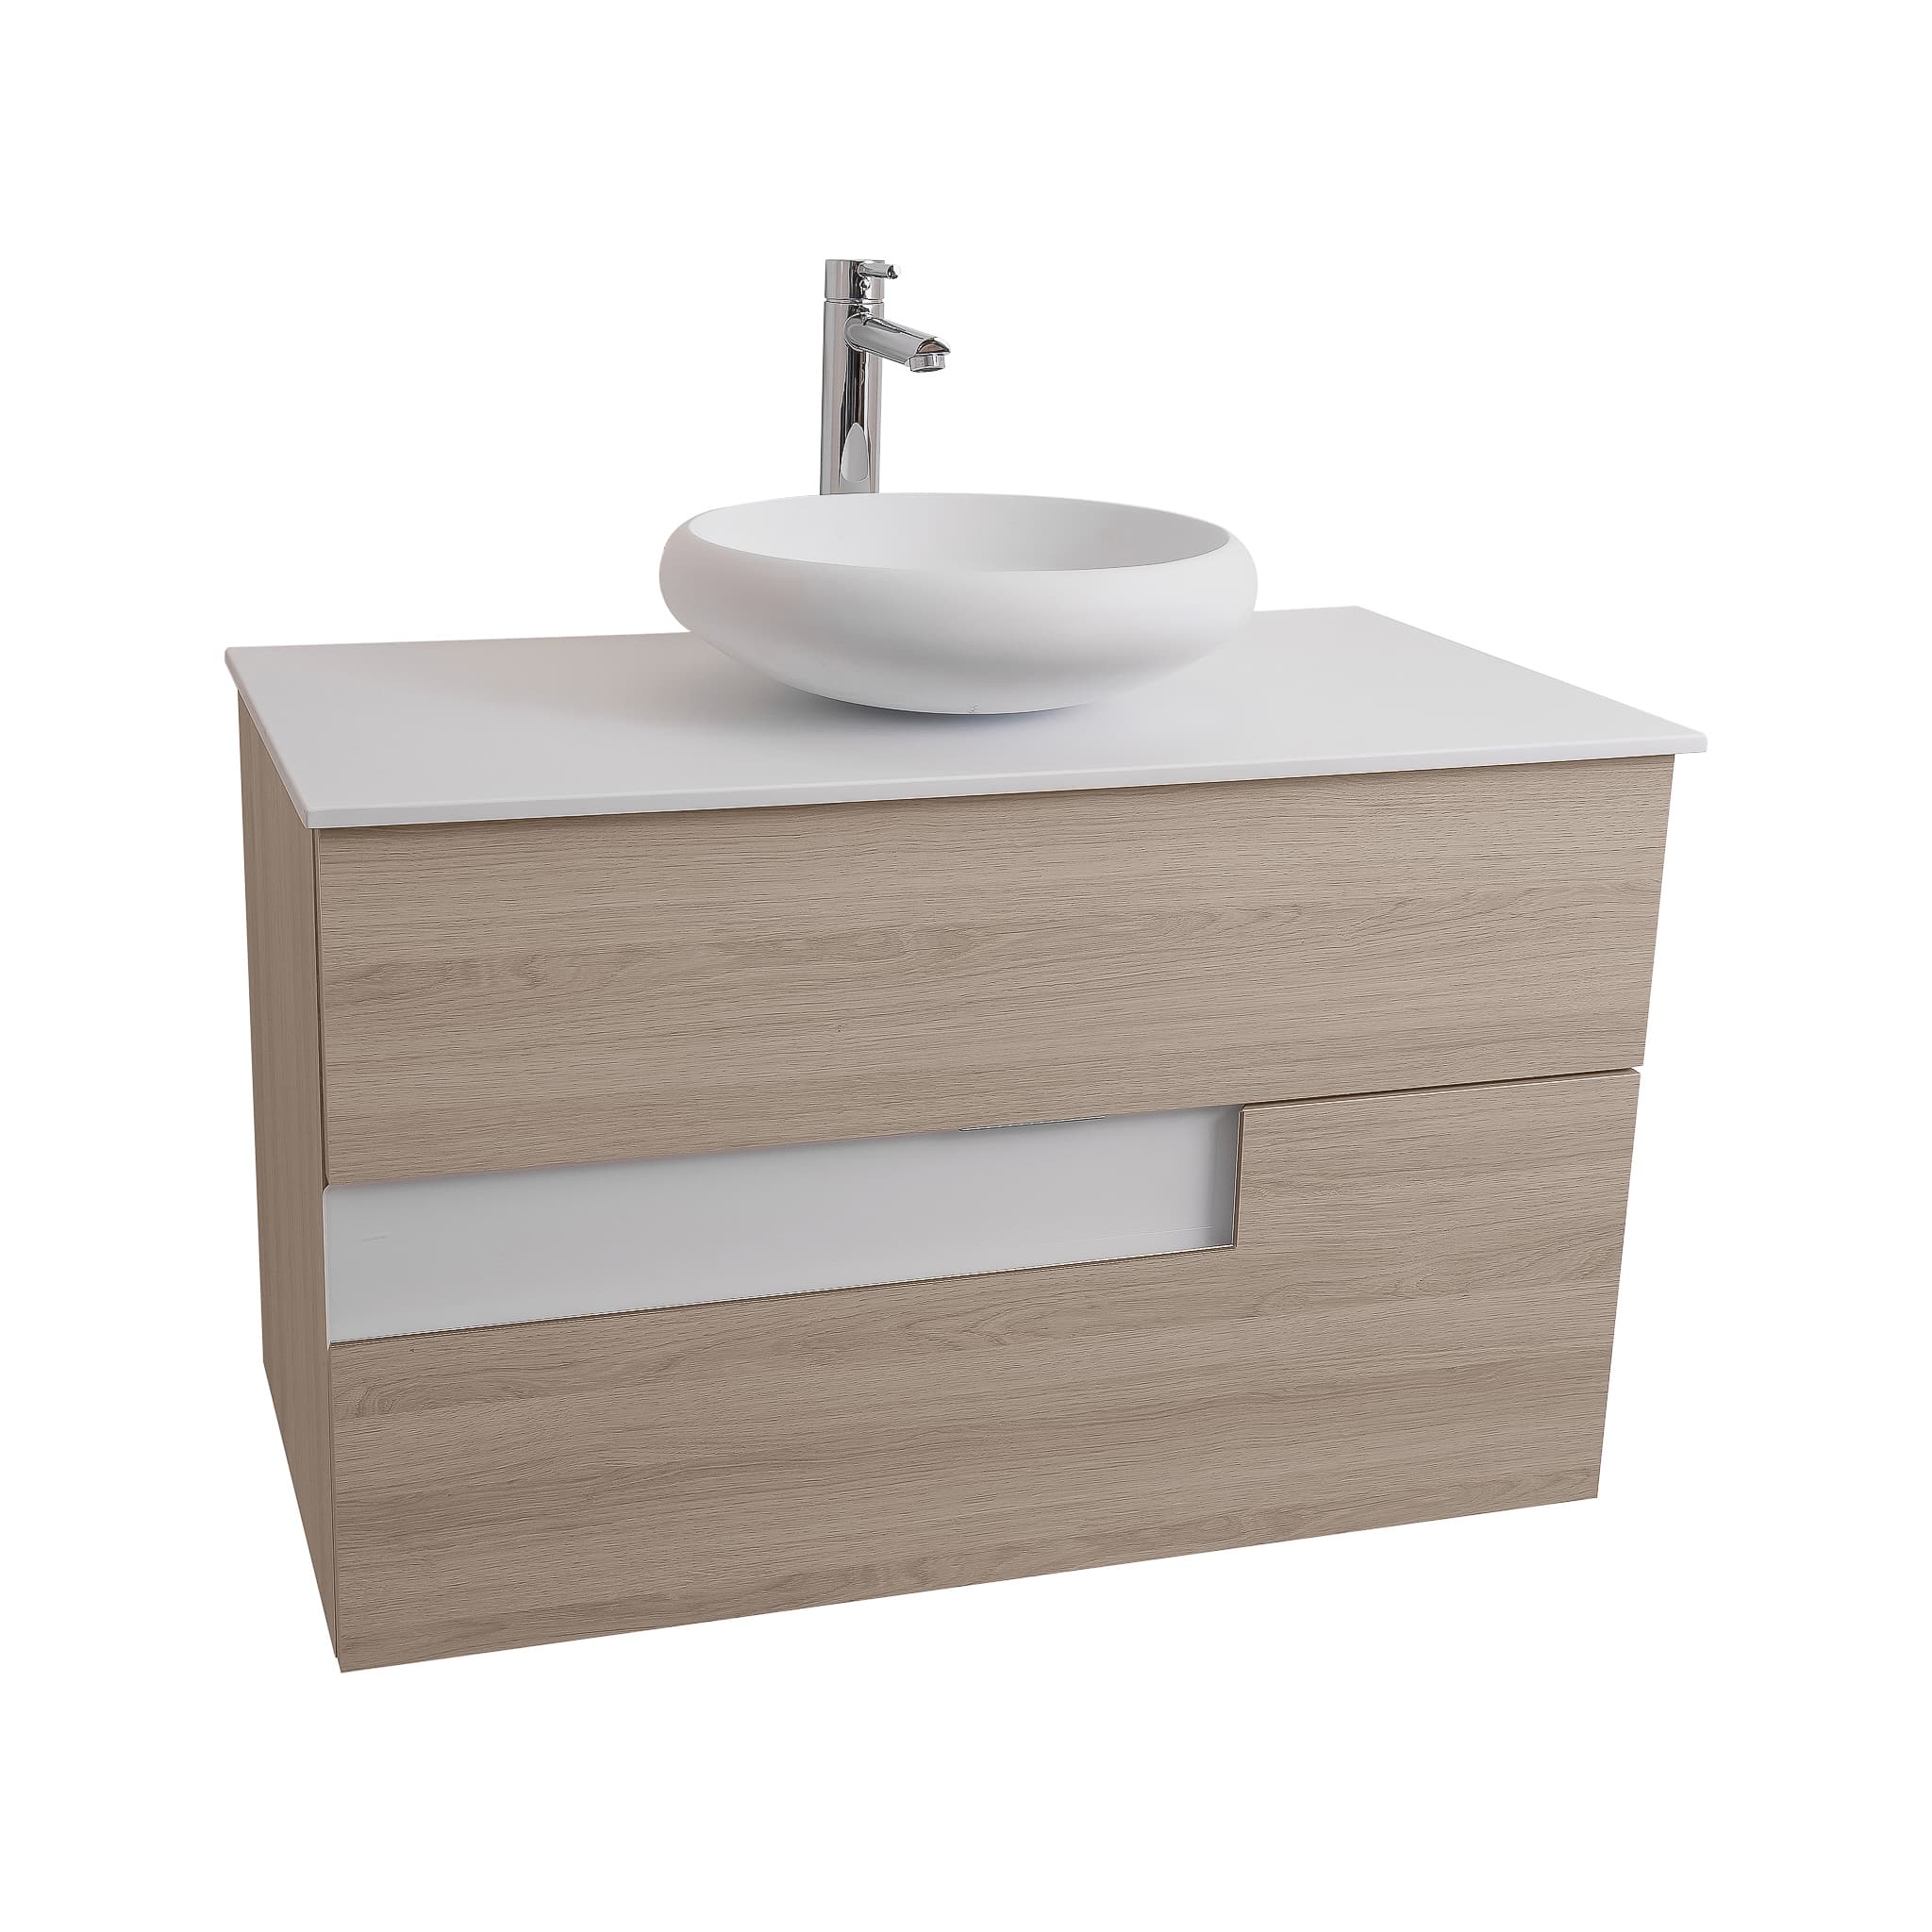 Vision 31.5 Natural Light Wood Cabinet, Solid Surface Flat White Counter And Round Solid Surface White Basin 1153, Wall Mounted Modern Vanity Set